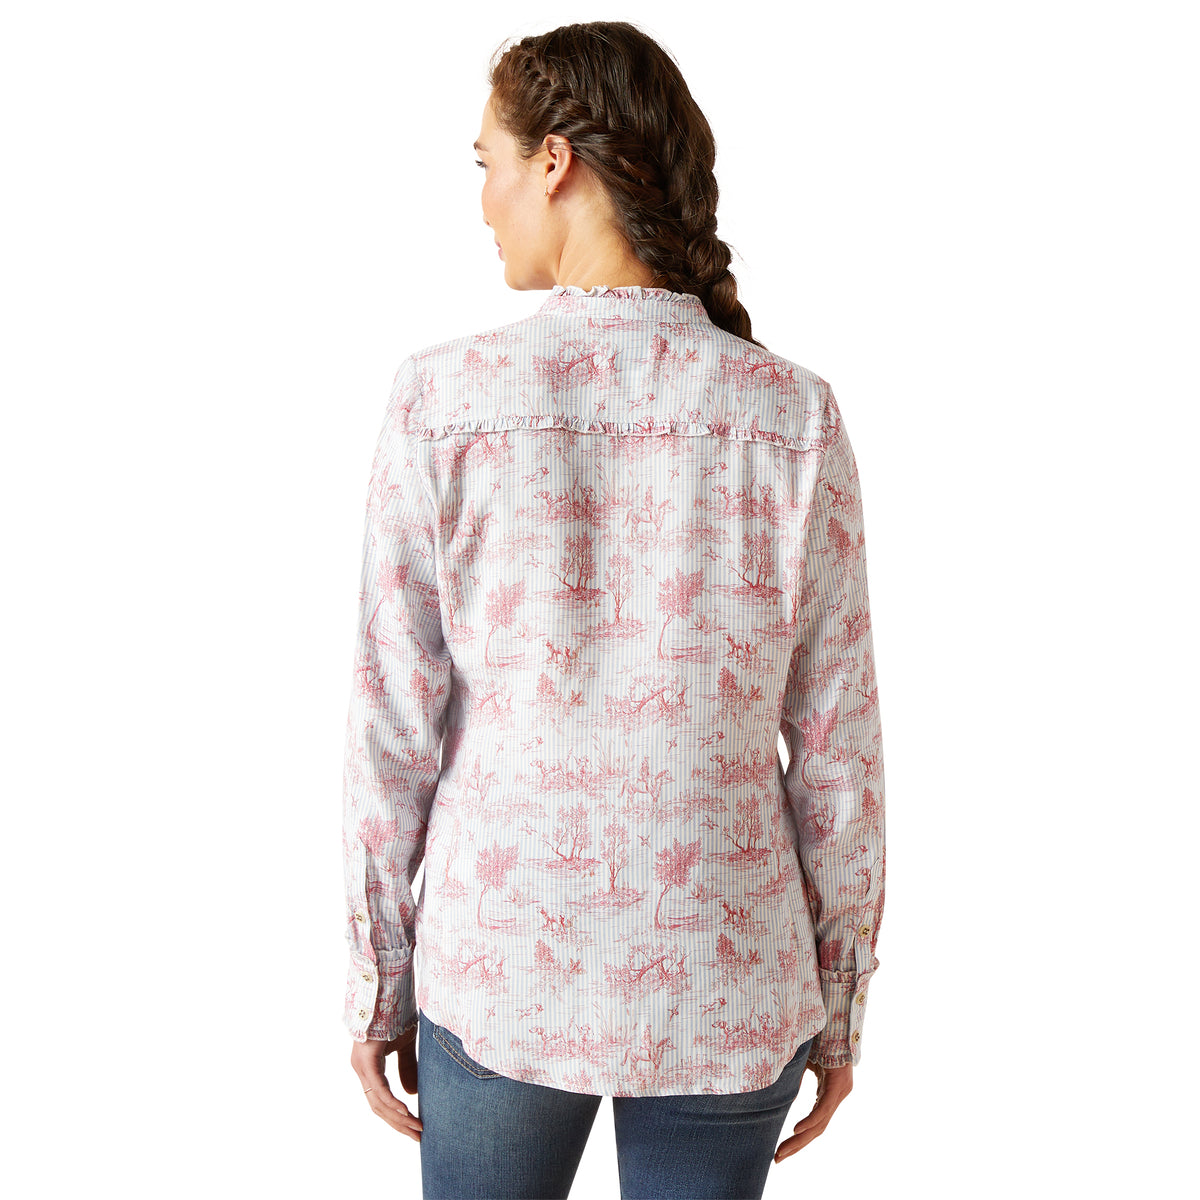 Ariat Women's Clarion Long Sleeve Blouse